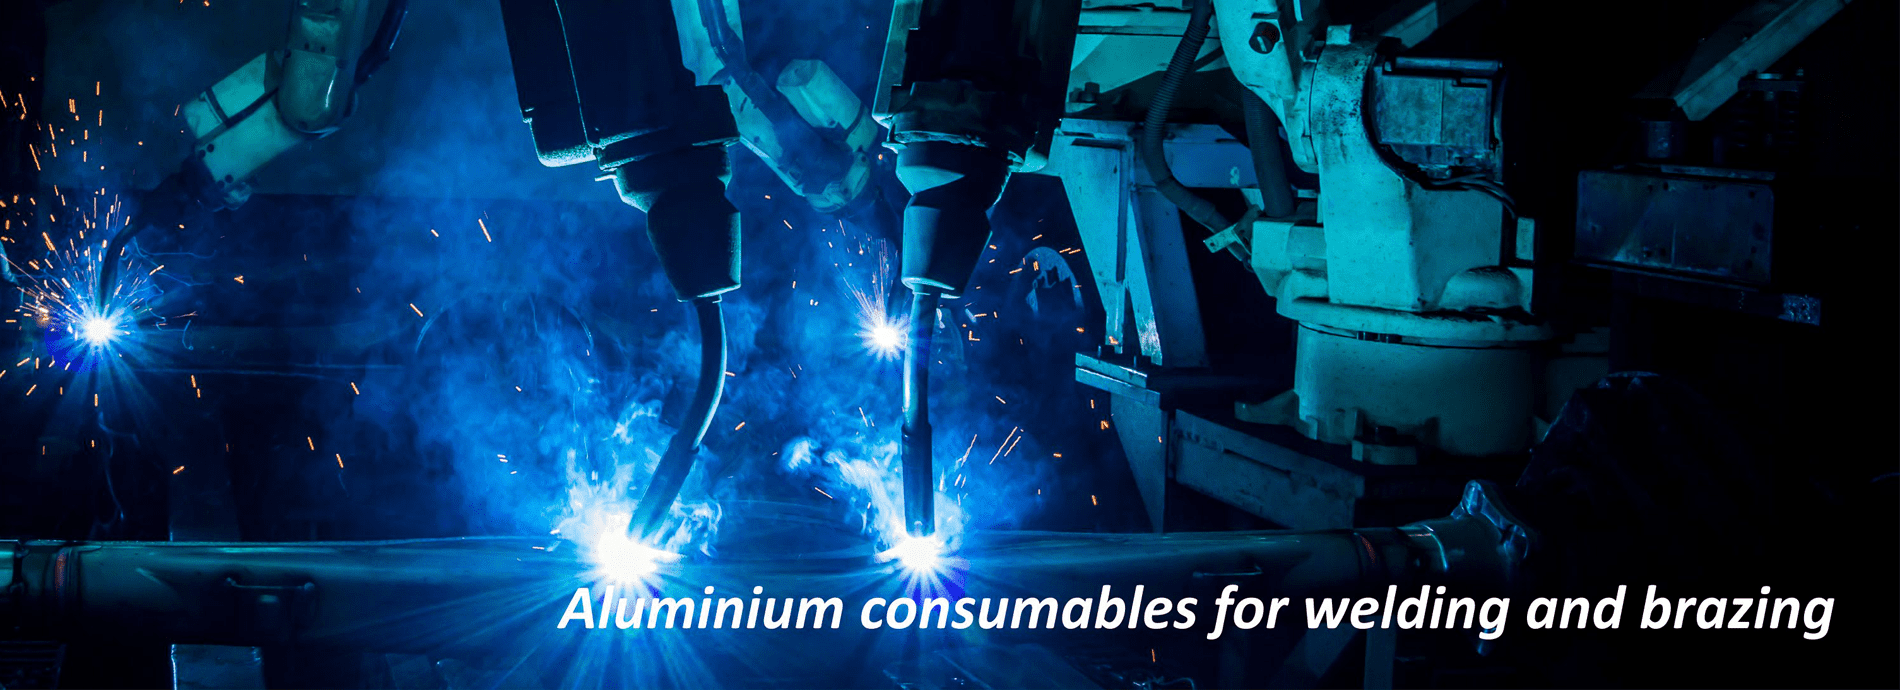 Aluminium consumables for welding and brazing